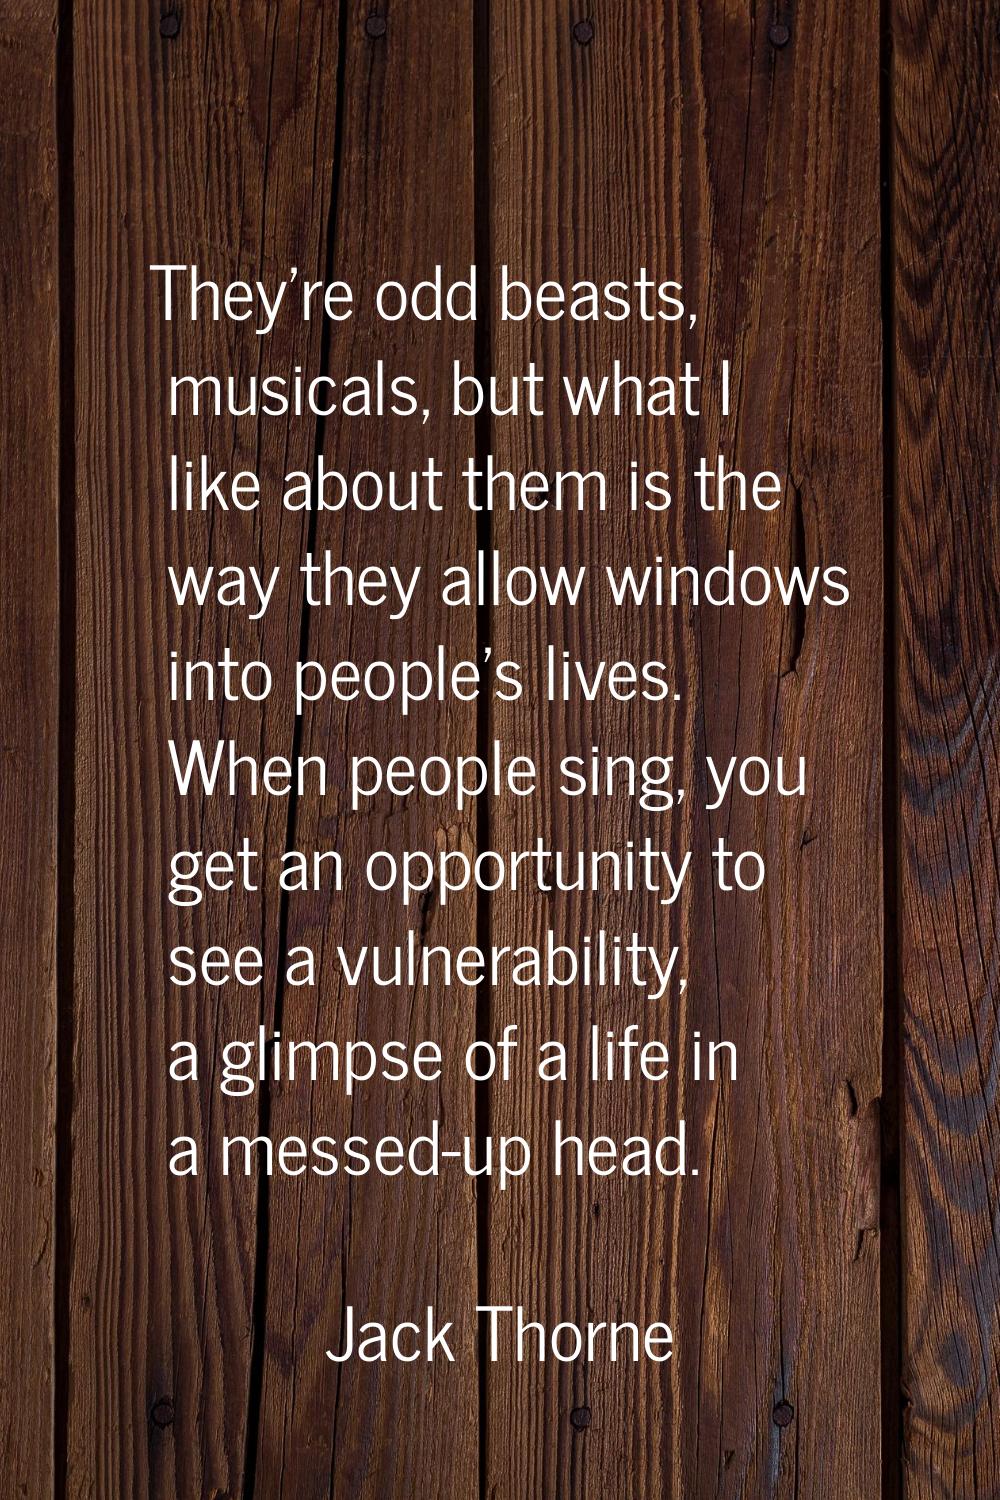 They're odd beasts, musicals, but what I like about them is the way they allow windows into people'